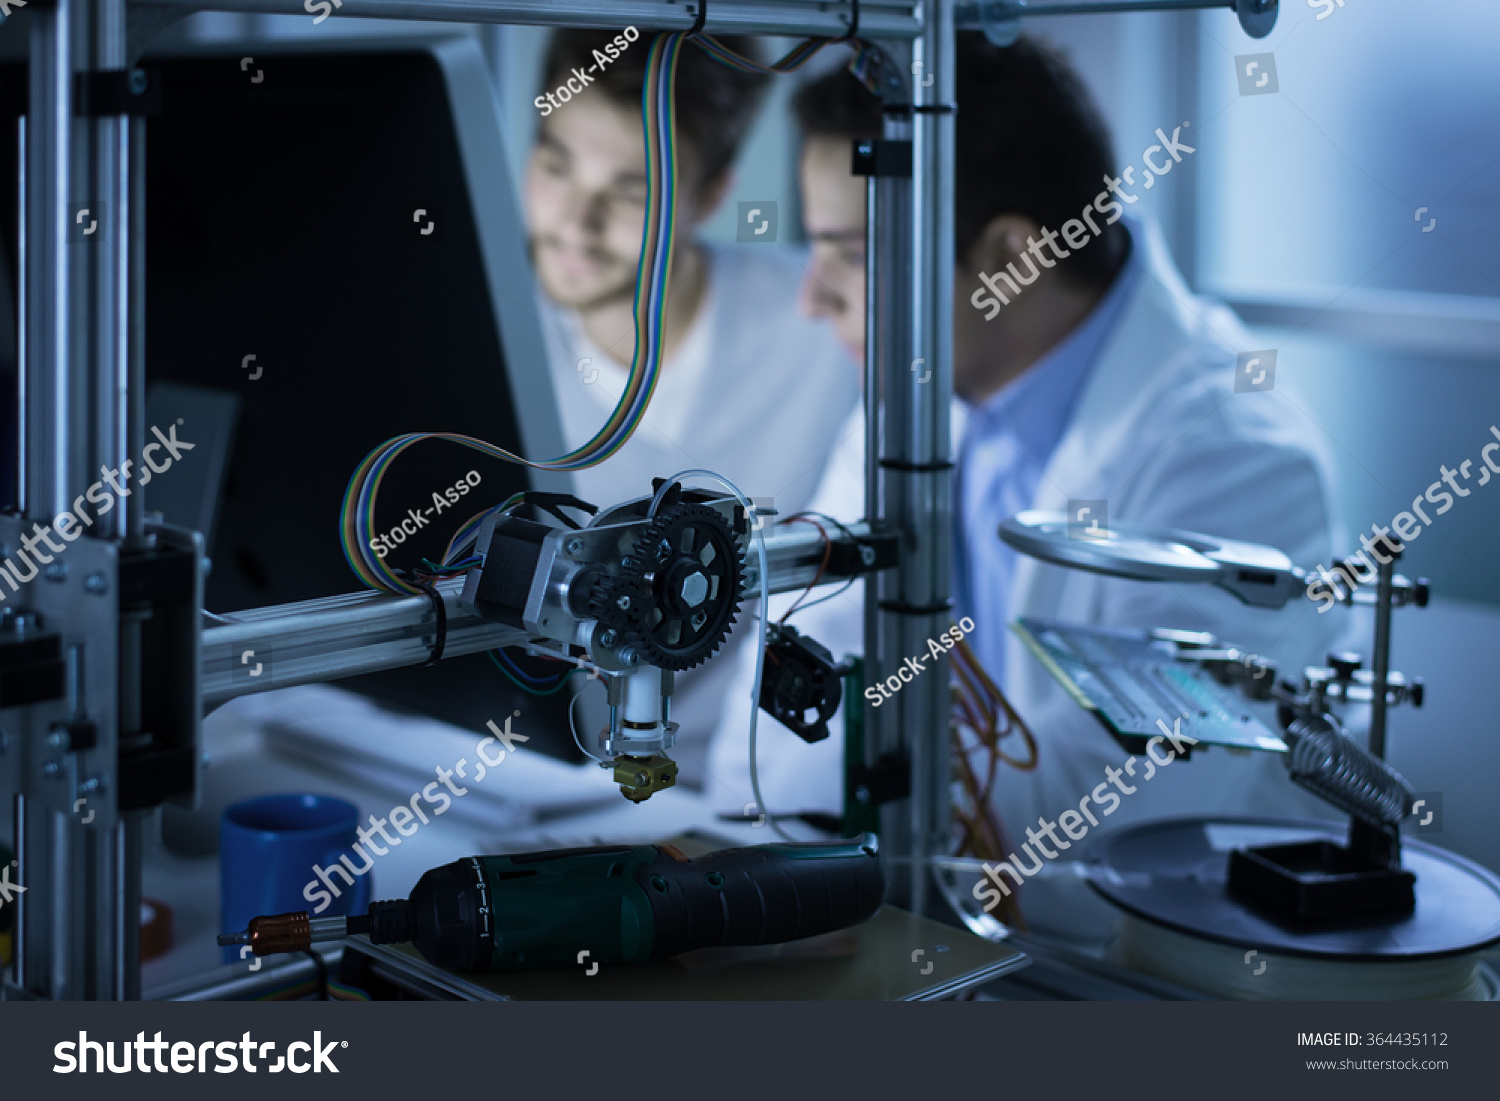 Young engineers working in the laboratory and using a computer, 3D printer on foreground, science and technology concept #364435112